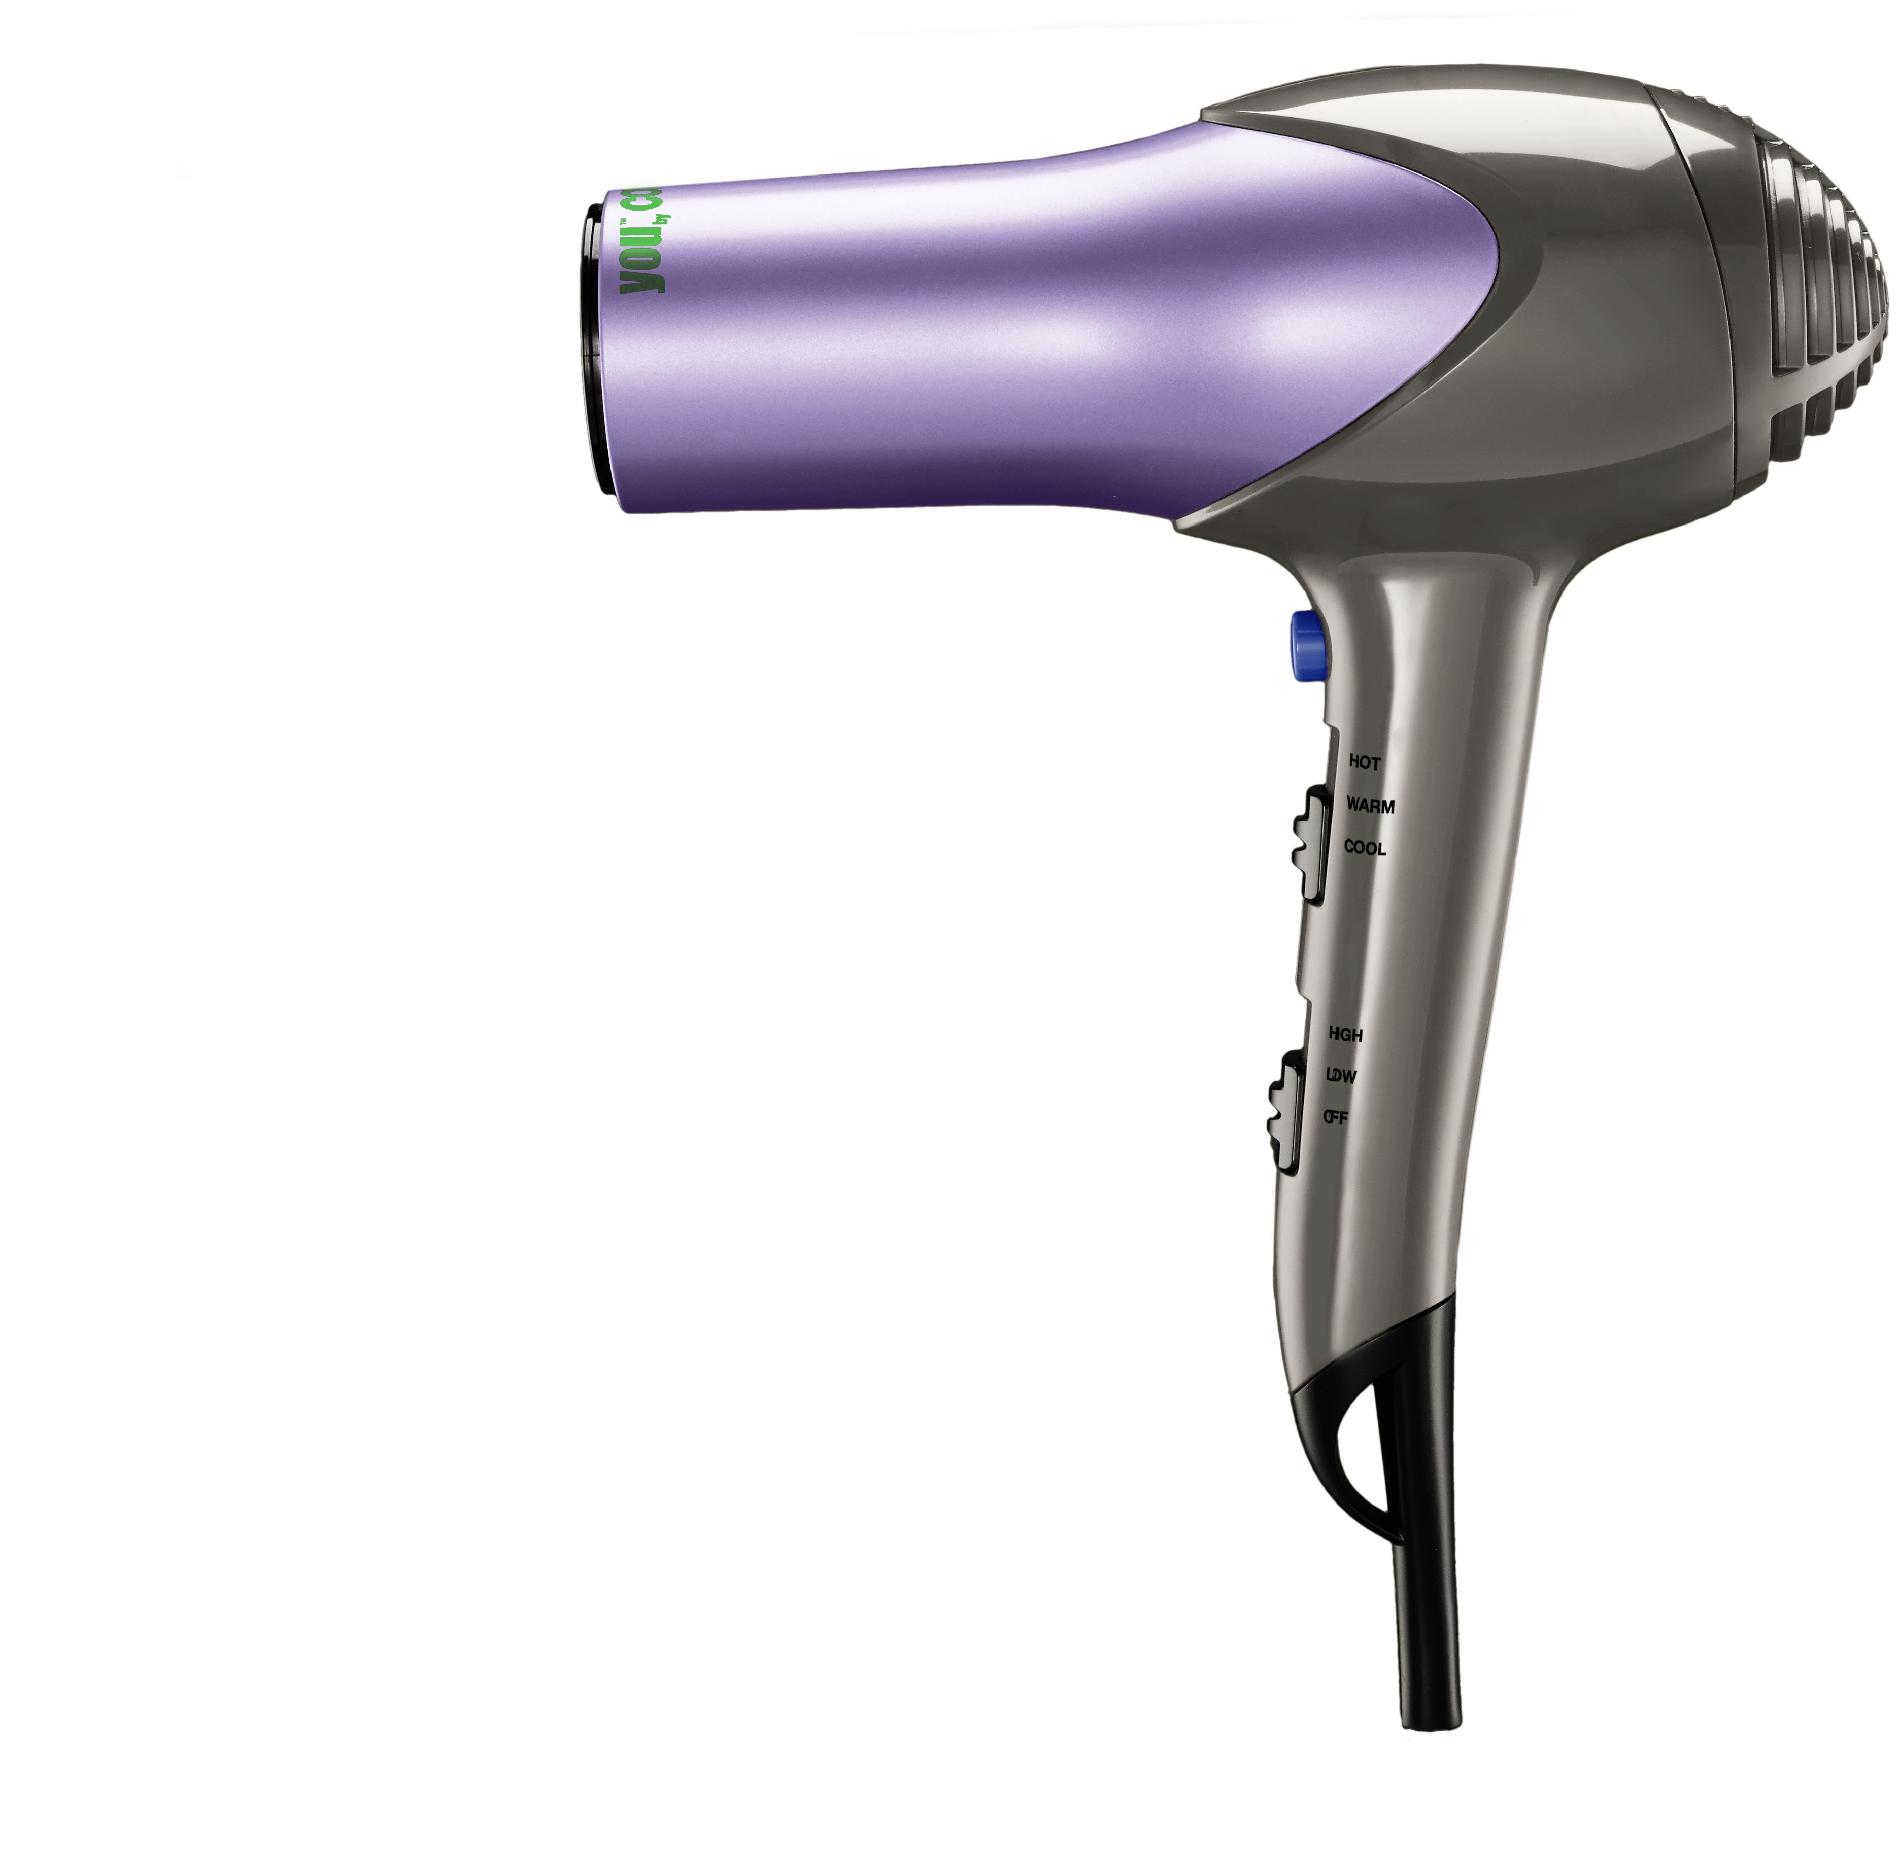 Conair You Style and Protect 1875 Watt Ceramic 2-in-1 Hair Dryer